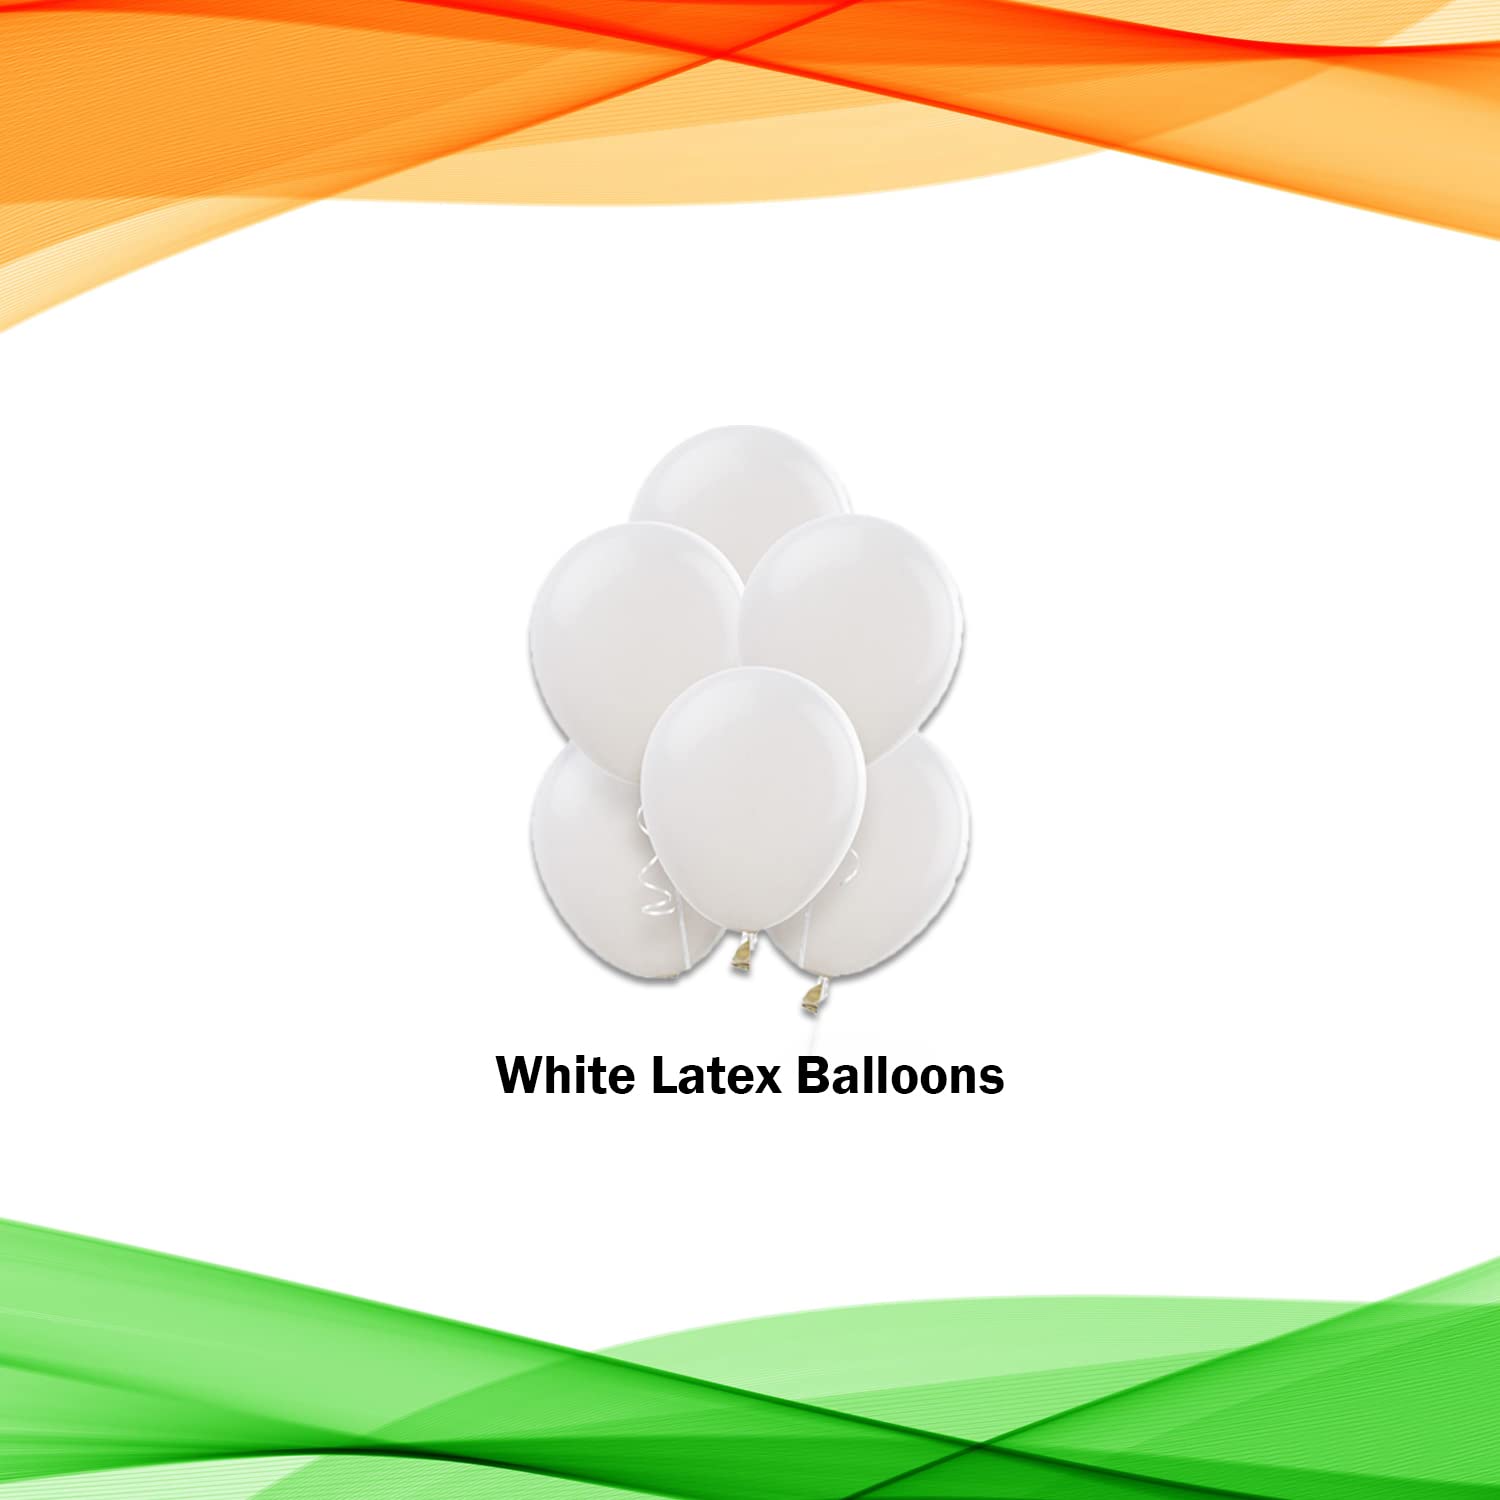 Happy Republic Day Decoration - Pack of 27 - Foil Balloon and Tricolor Balloons freeshipping - CherishX Partystore